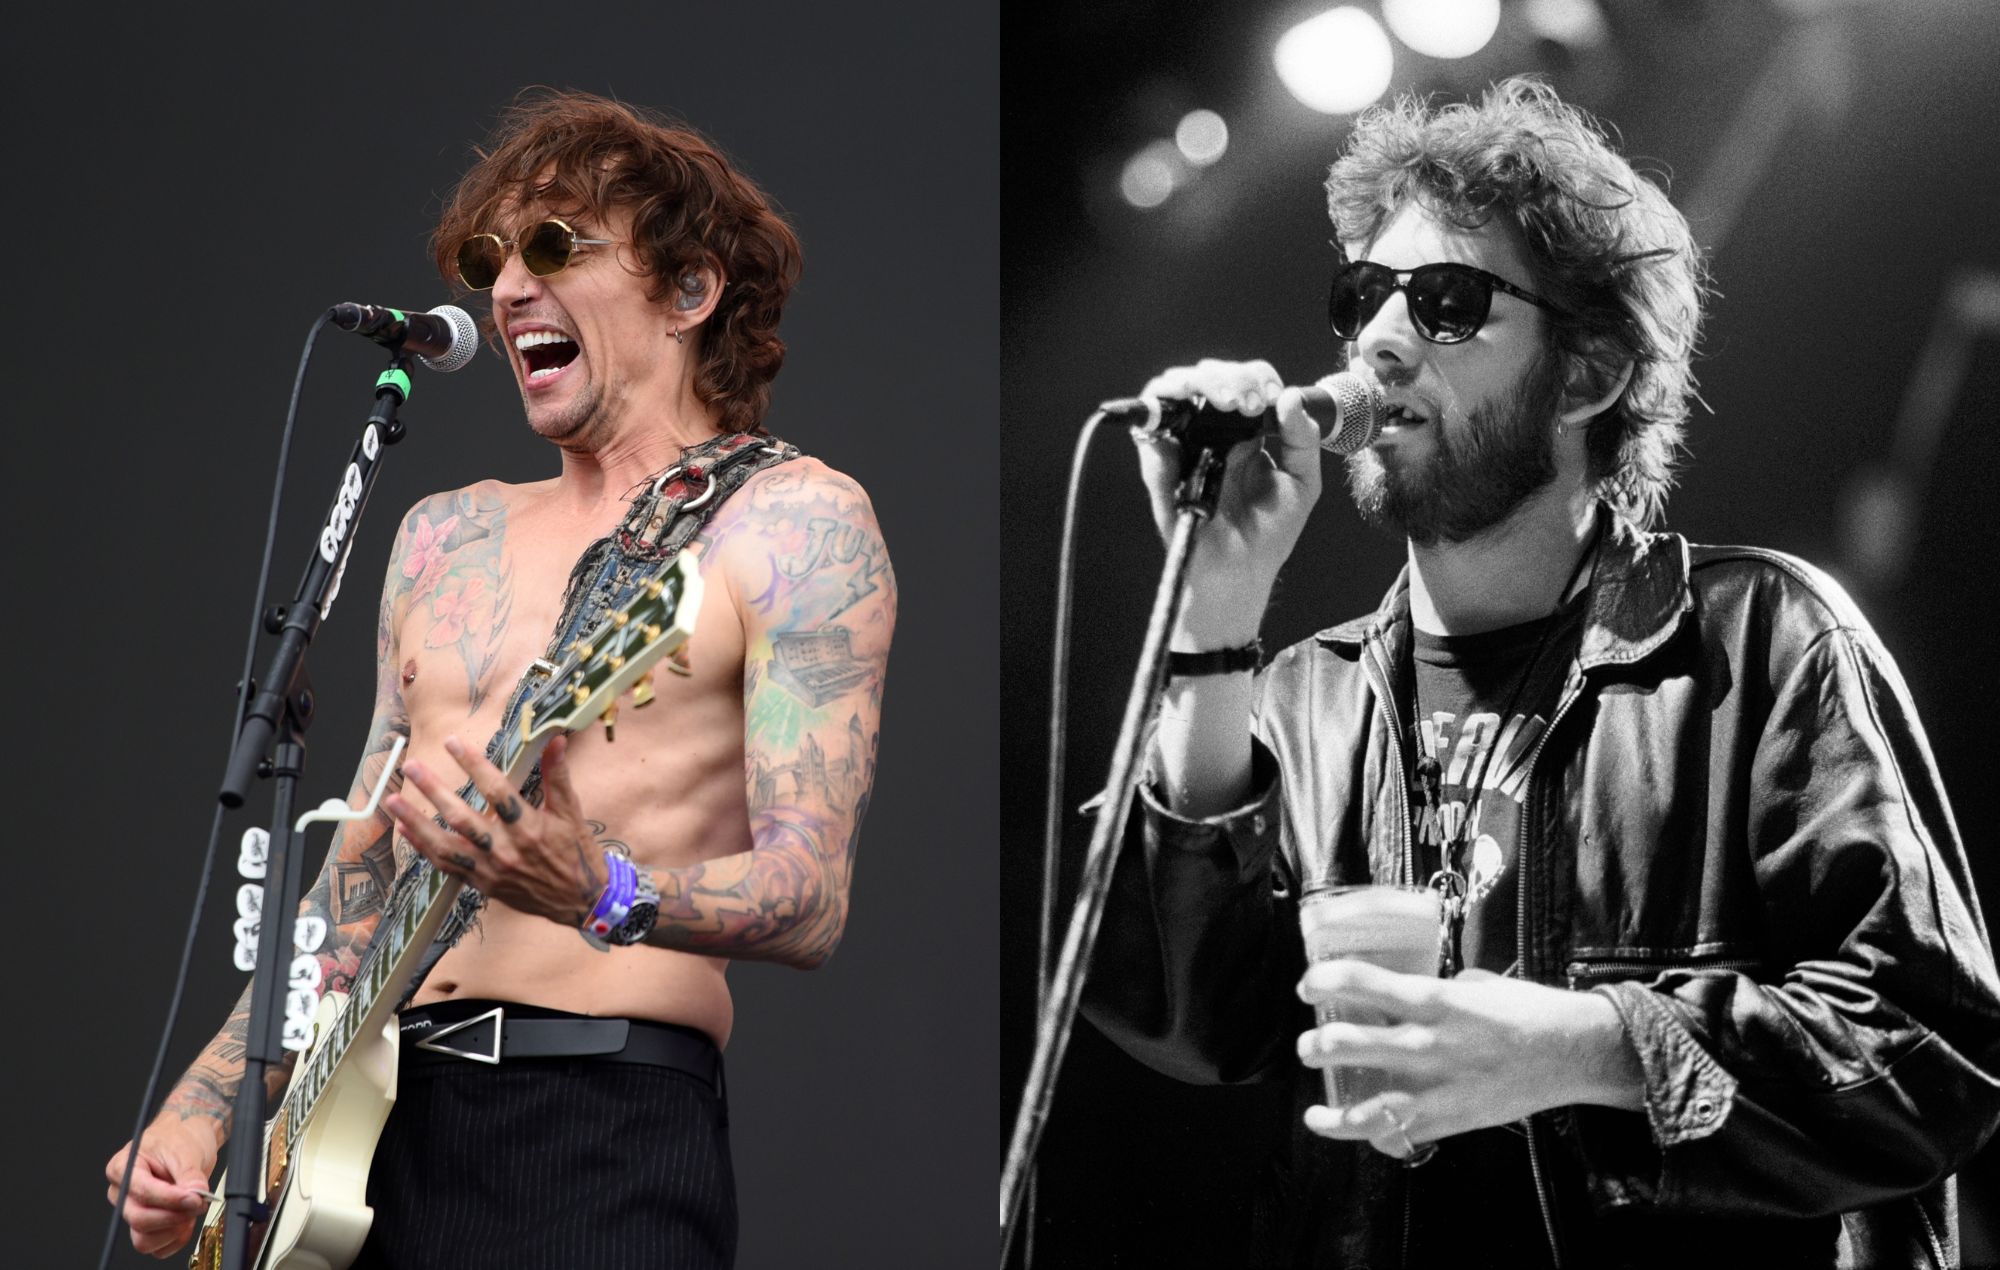 Watch The Darkness pay tribute to Shane MacGowan with The Pogues sing-along in Dublin